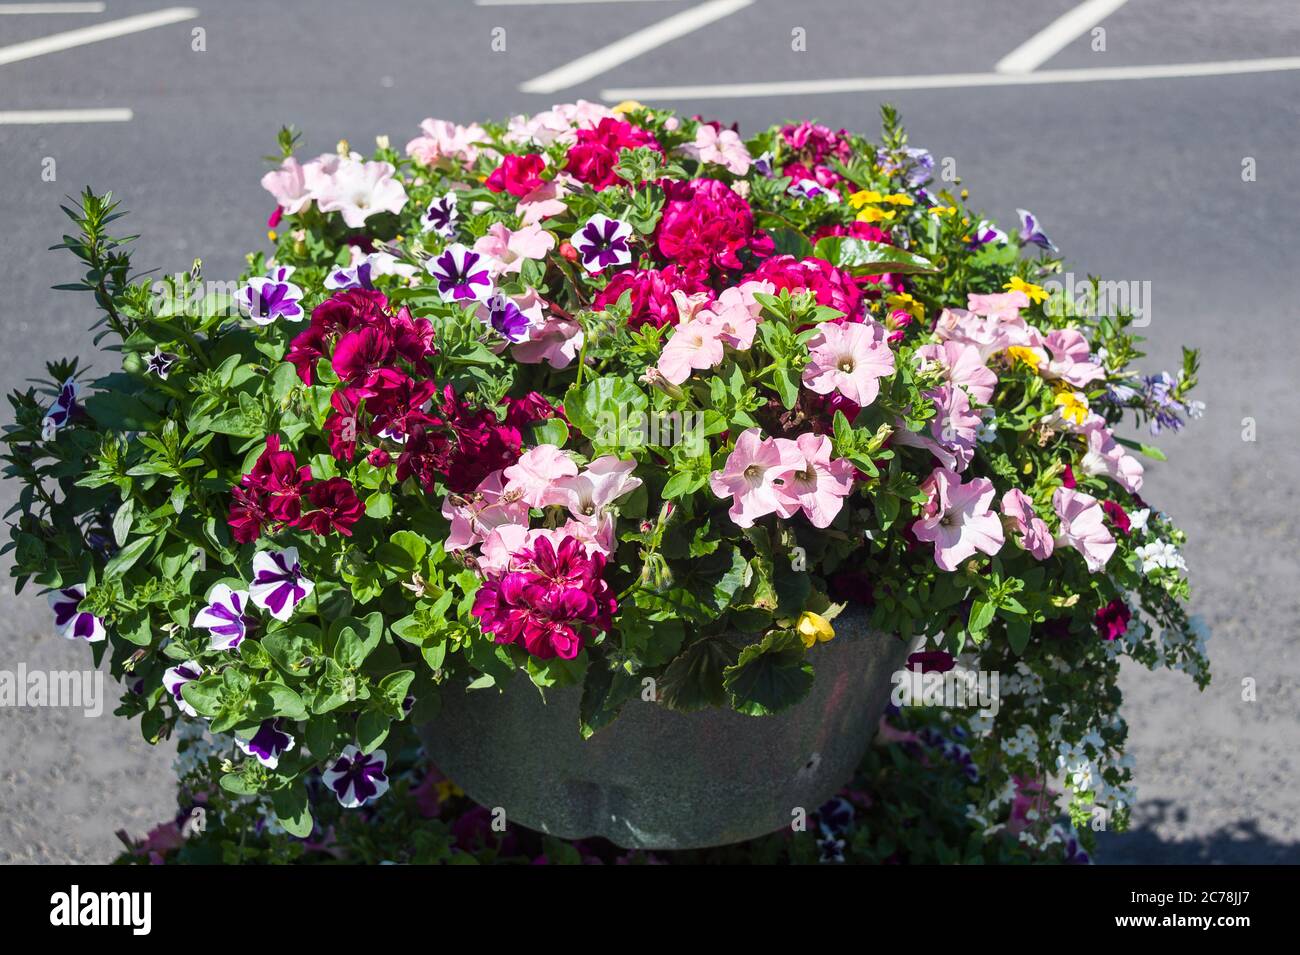 Urban horticulture. A floral container in the centre of Devizes UK with petunias and geraniums Stock Photo